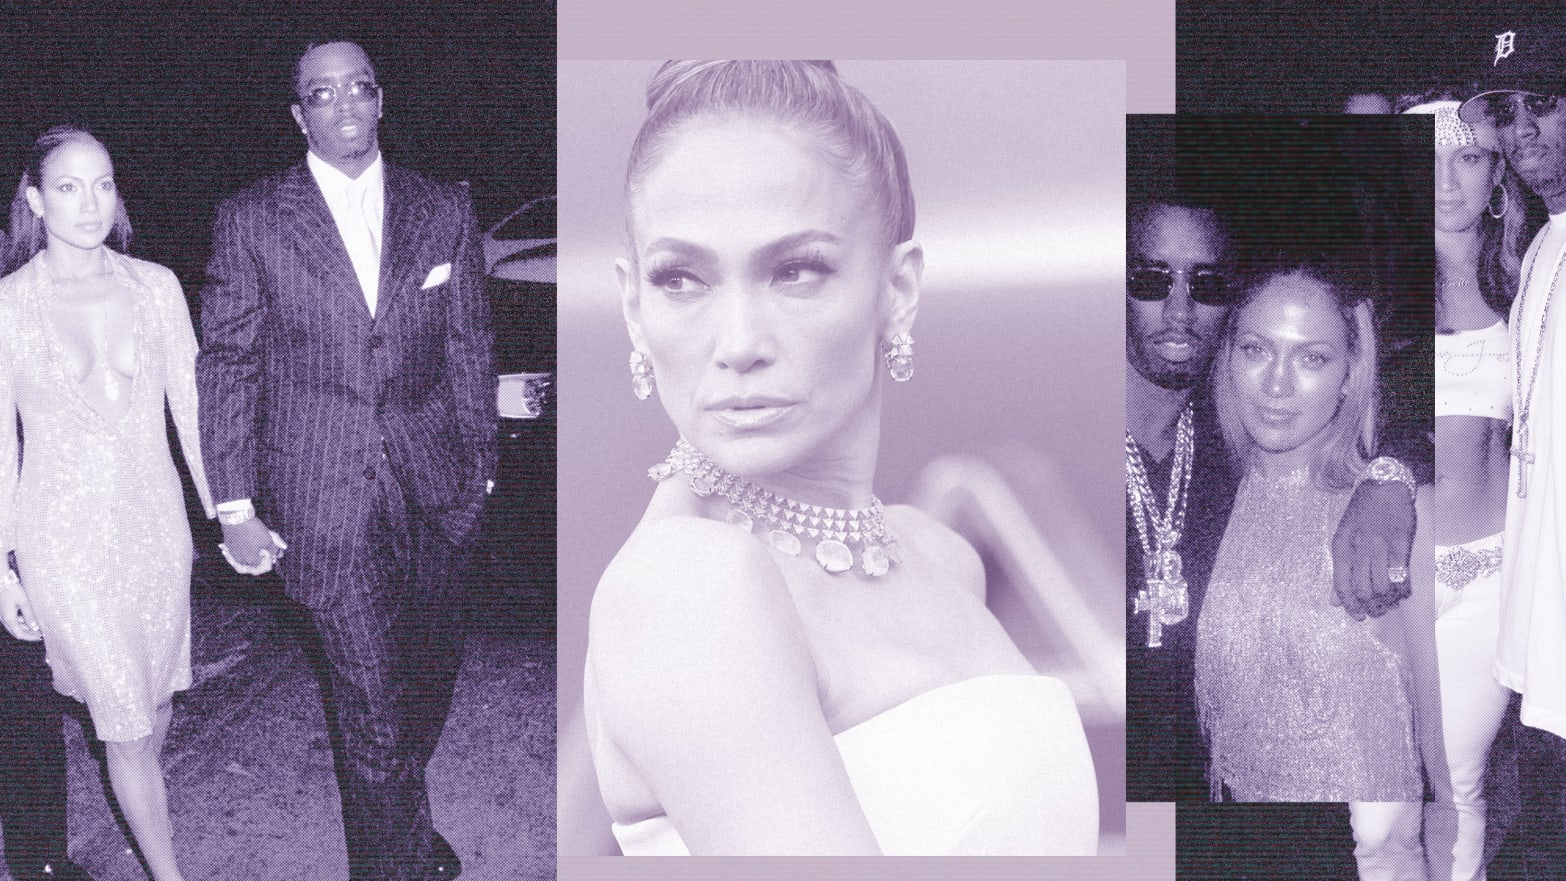 A photo illustration showing Jennifer Lopez and Sean “Diddy” Combs